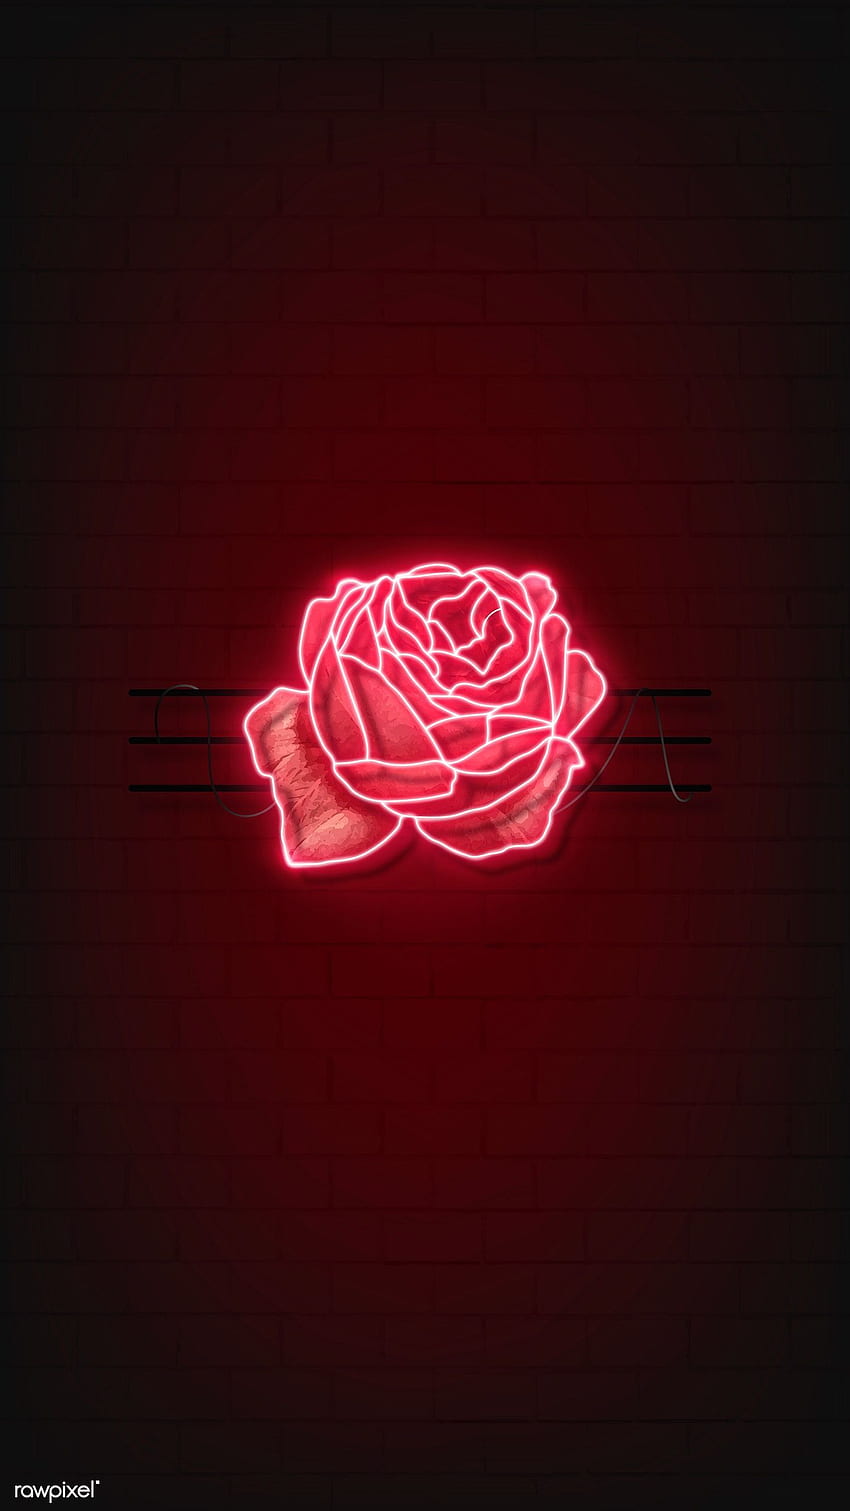 1920x1080px, 1080P Free download | Red Aesthetic Neon , Aesthetic Cute ...